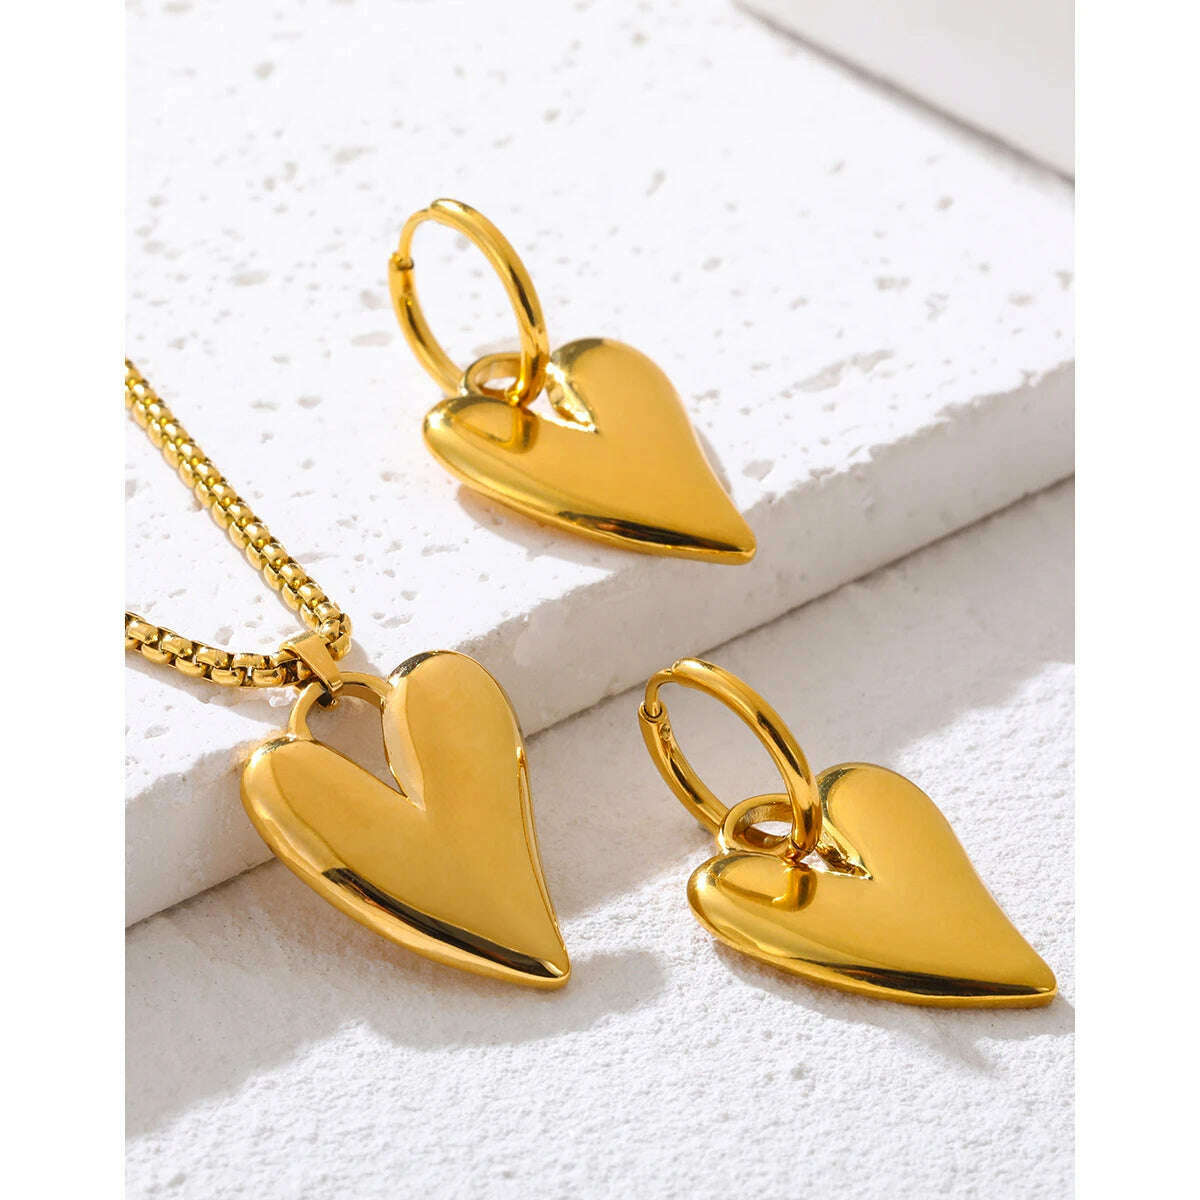 KIMLUD, YACHAN 18K Gold Plated Stainless Steel Irregular Heart Necklace Earrings for Women Glossy Chic Waterproof Jewelry Set, KIMLUD Womens Clothes